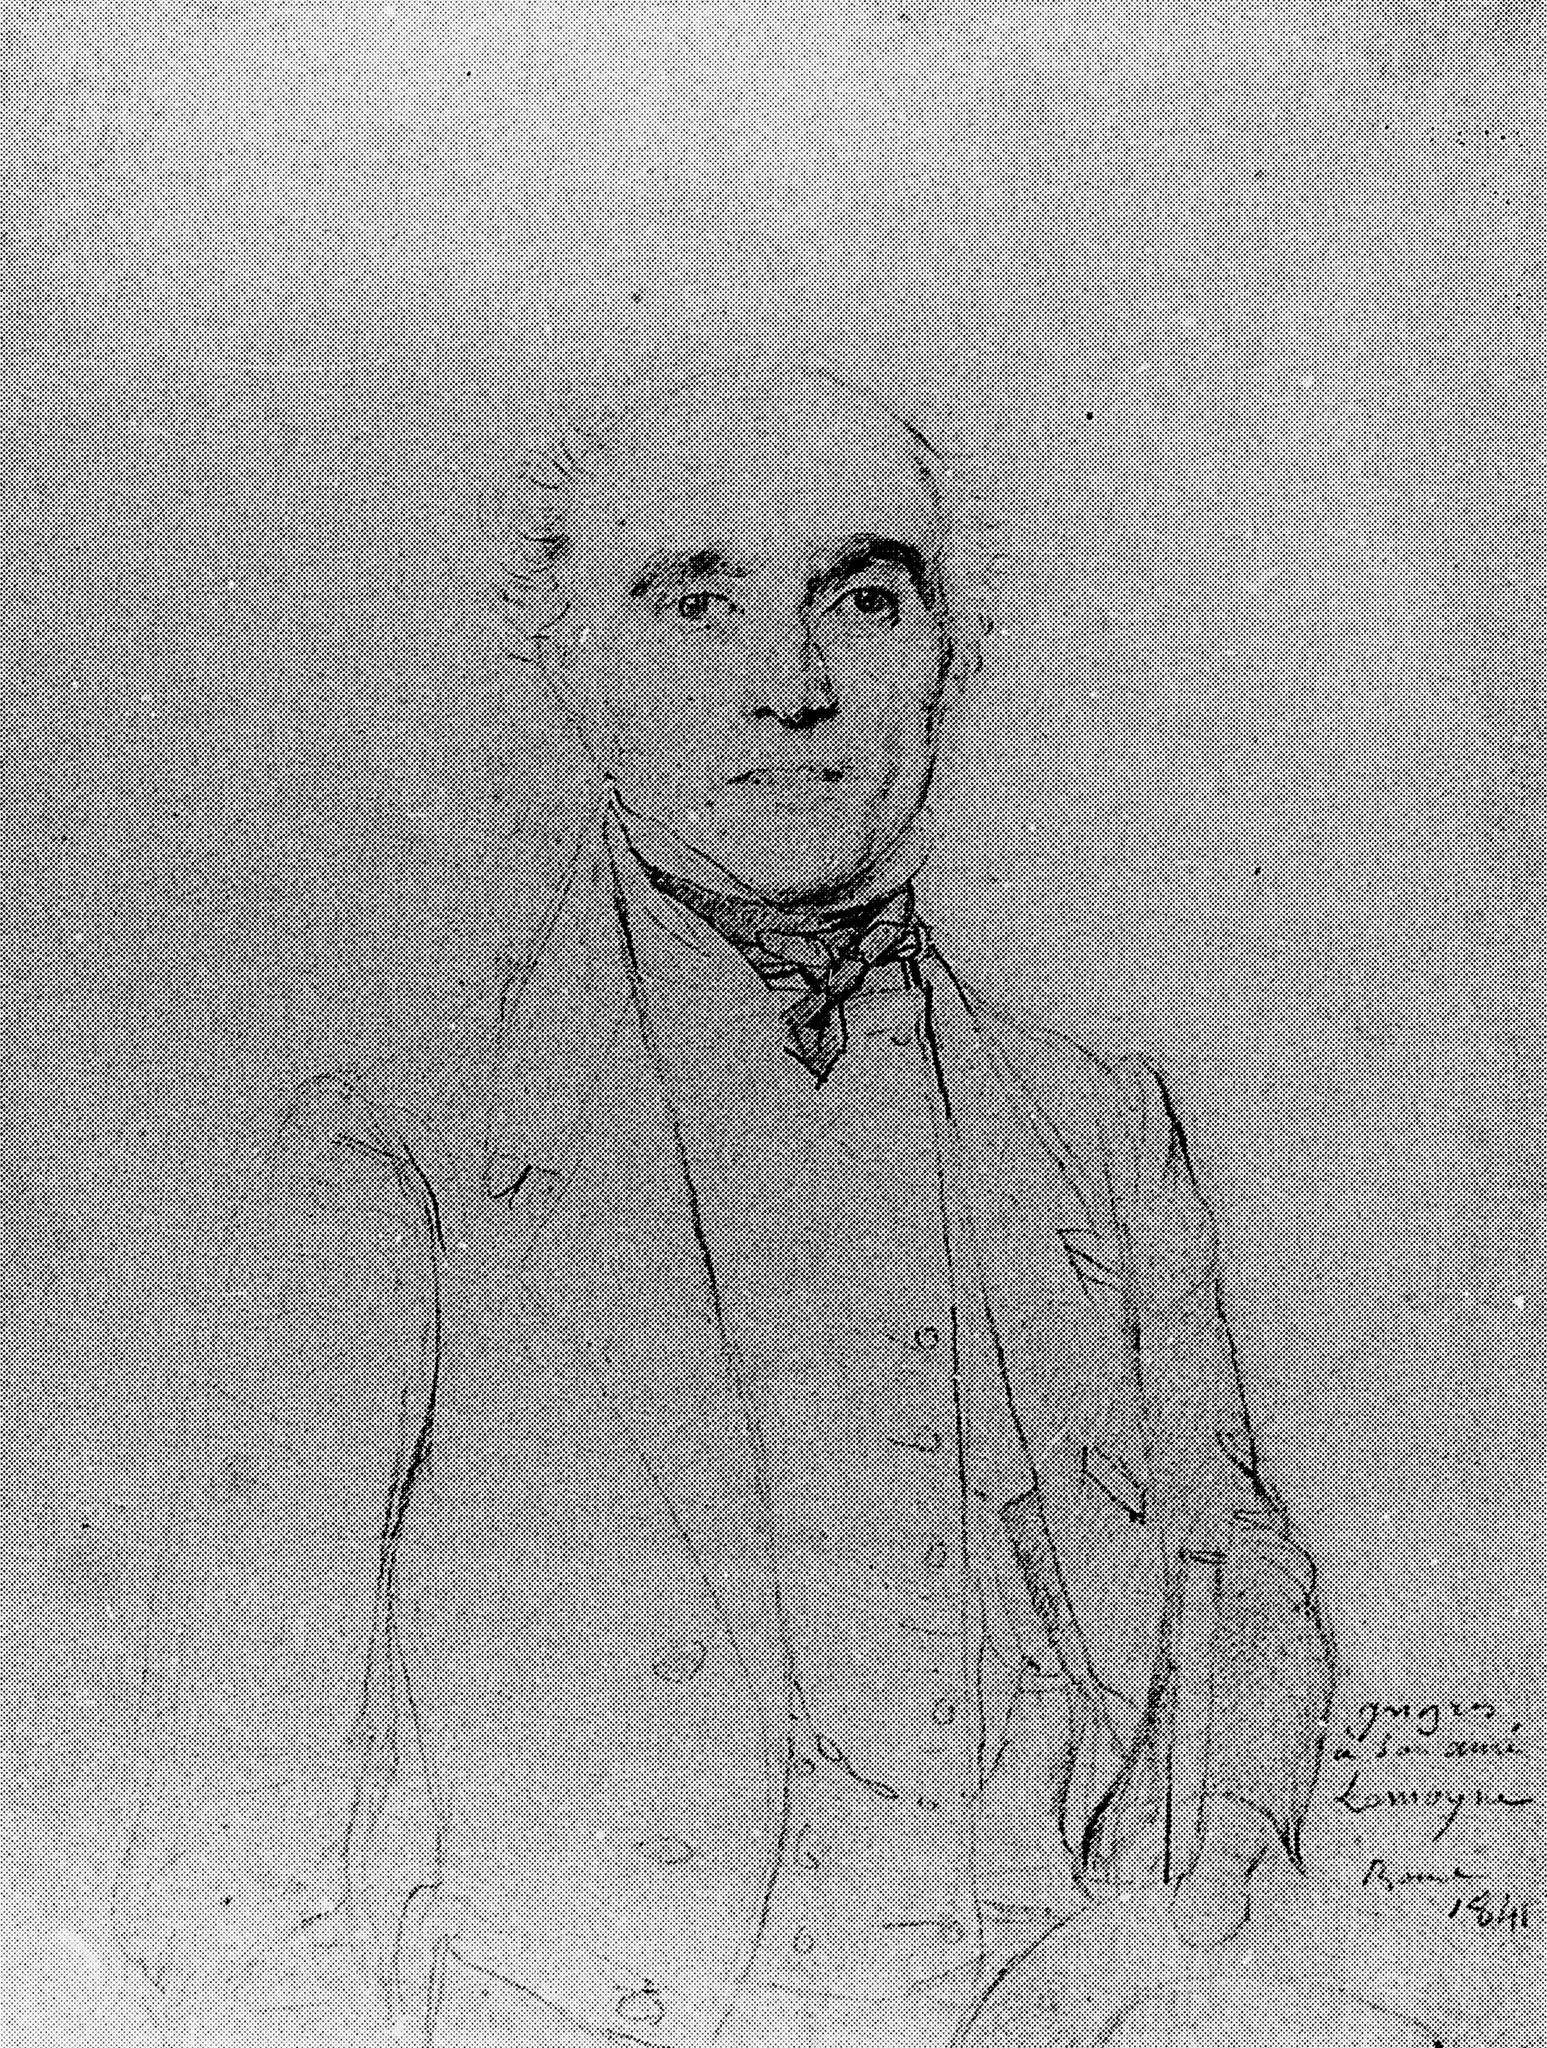 A black and white sketch of a bald older man with big eyebrows. He wears a suit jacket and a necktie.